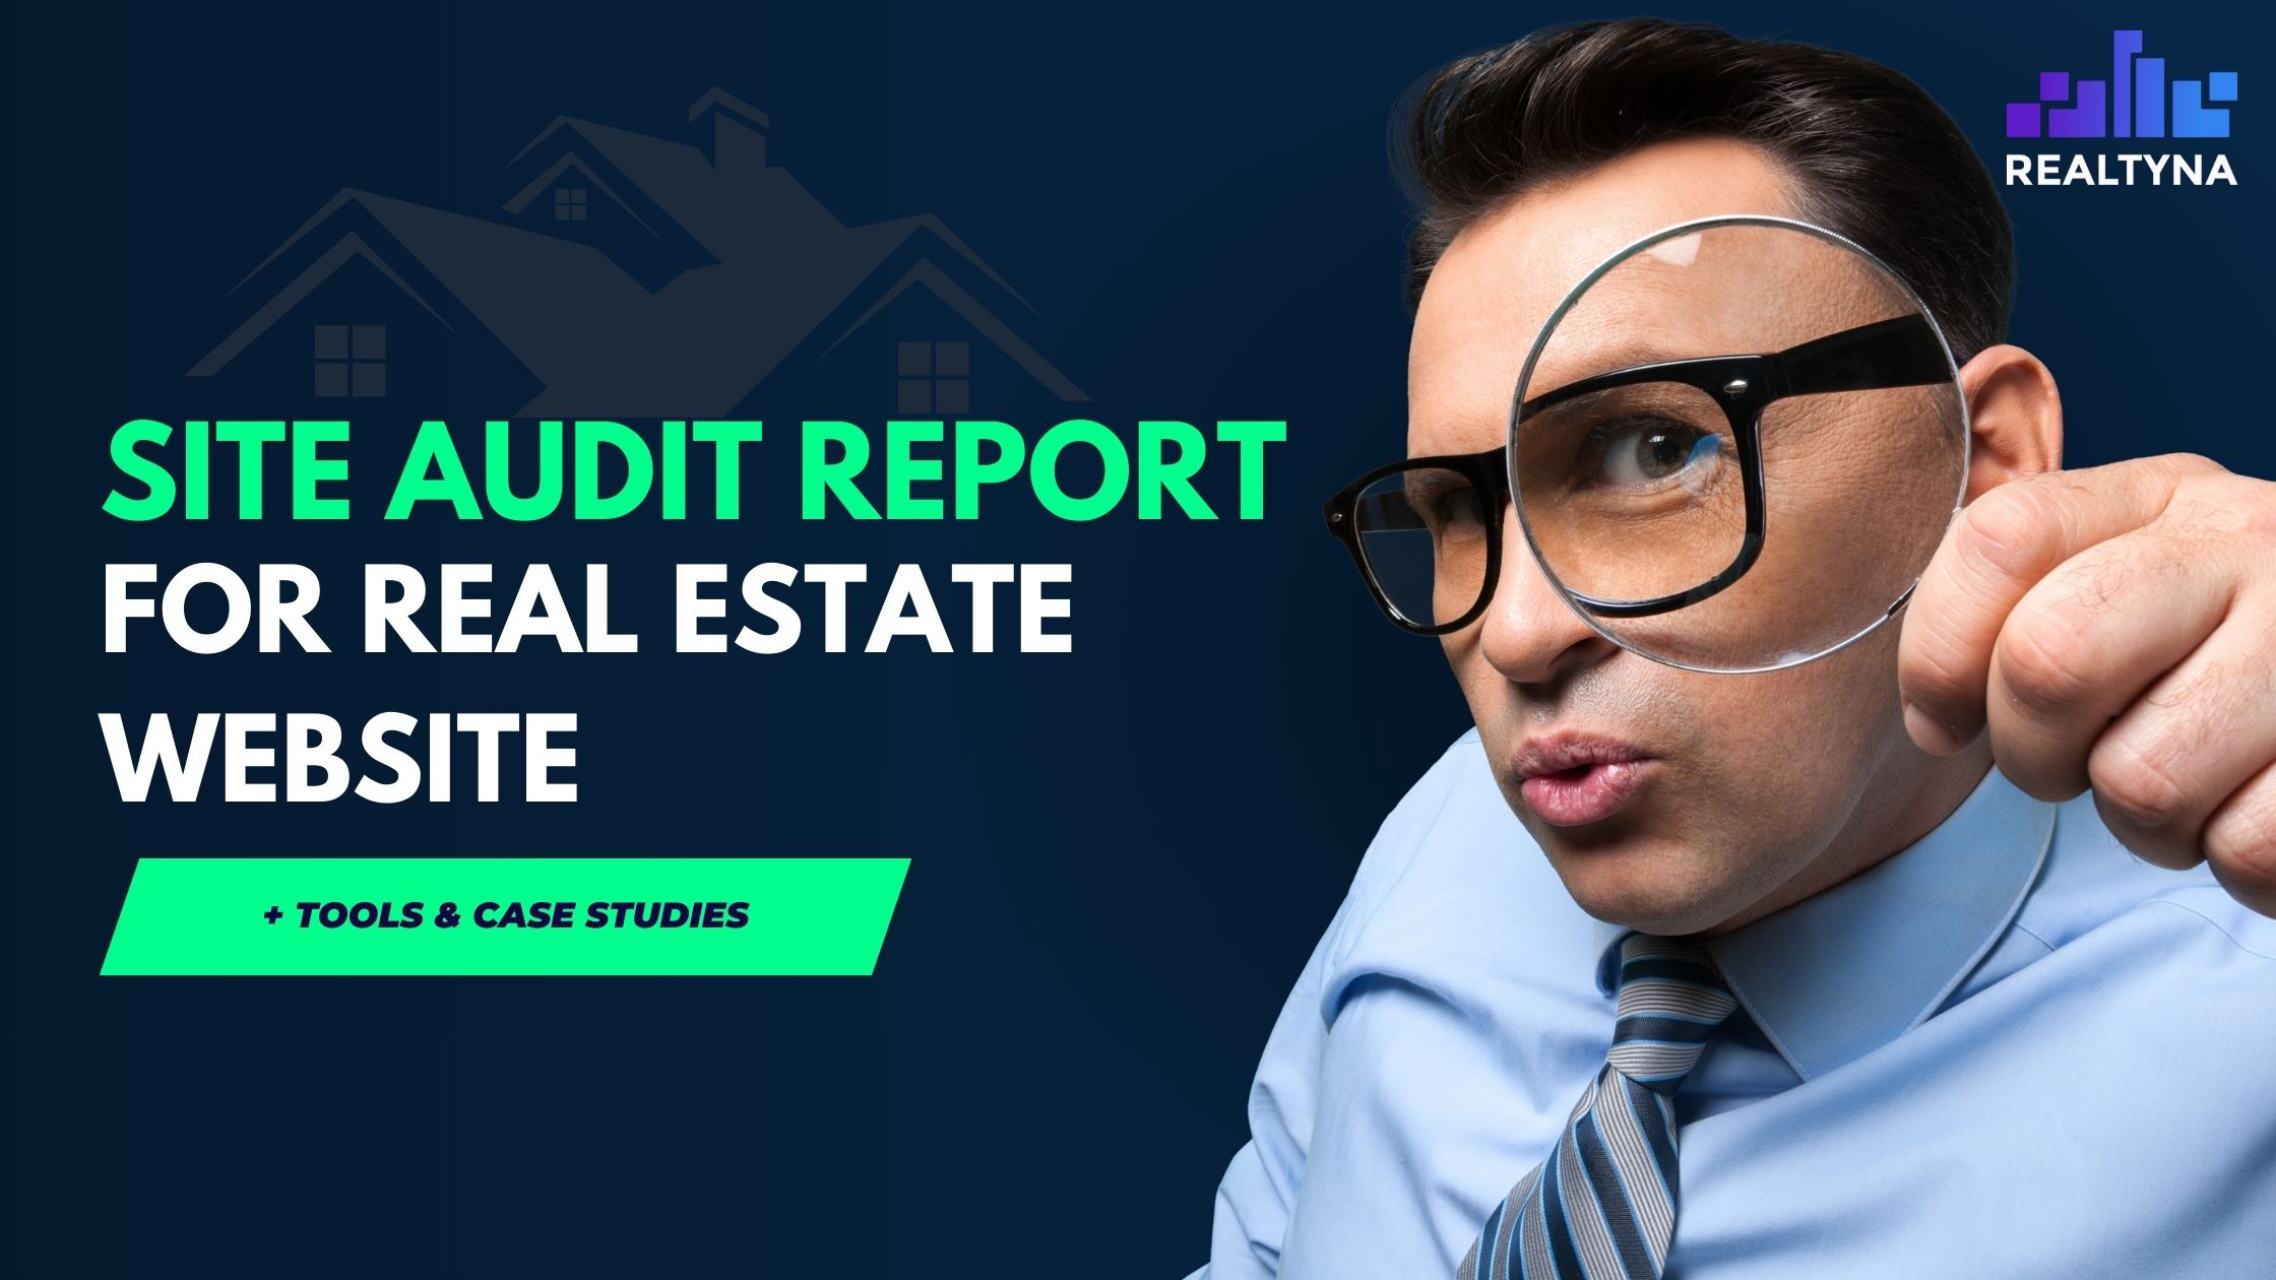 What is a Site Audit Report for Real Estate Websites